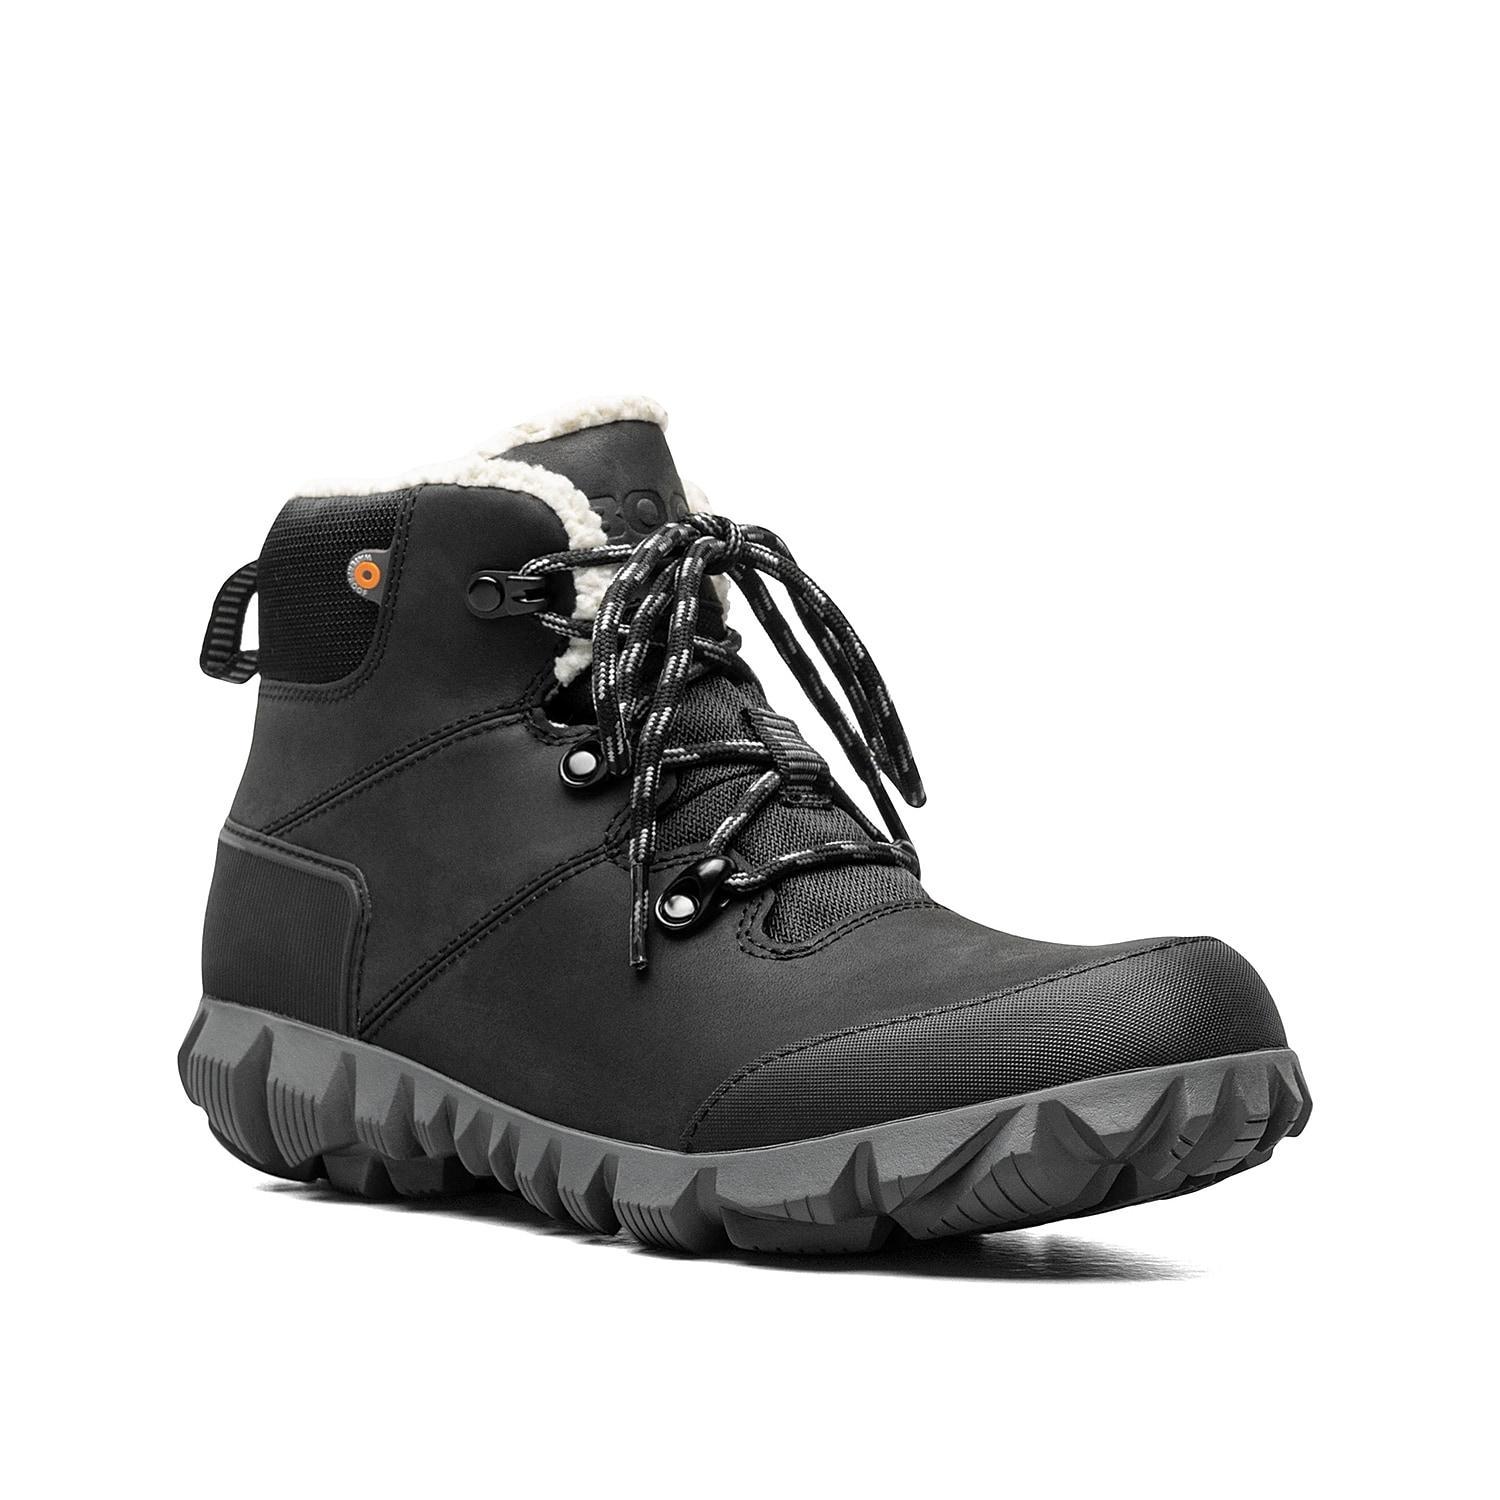 Bogs Arcata Waterproof Urban Ankle Boot Product Image